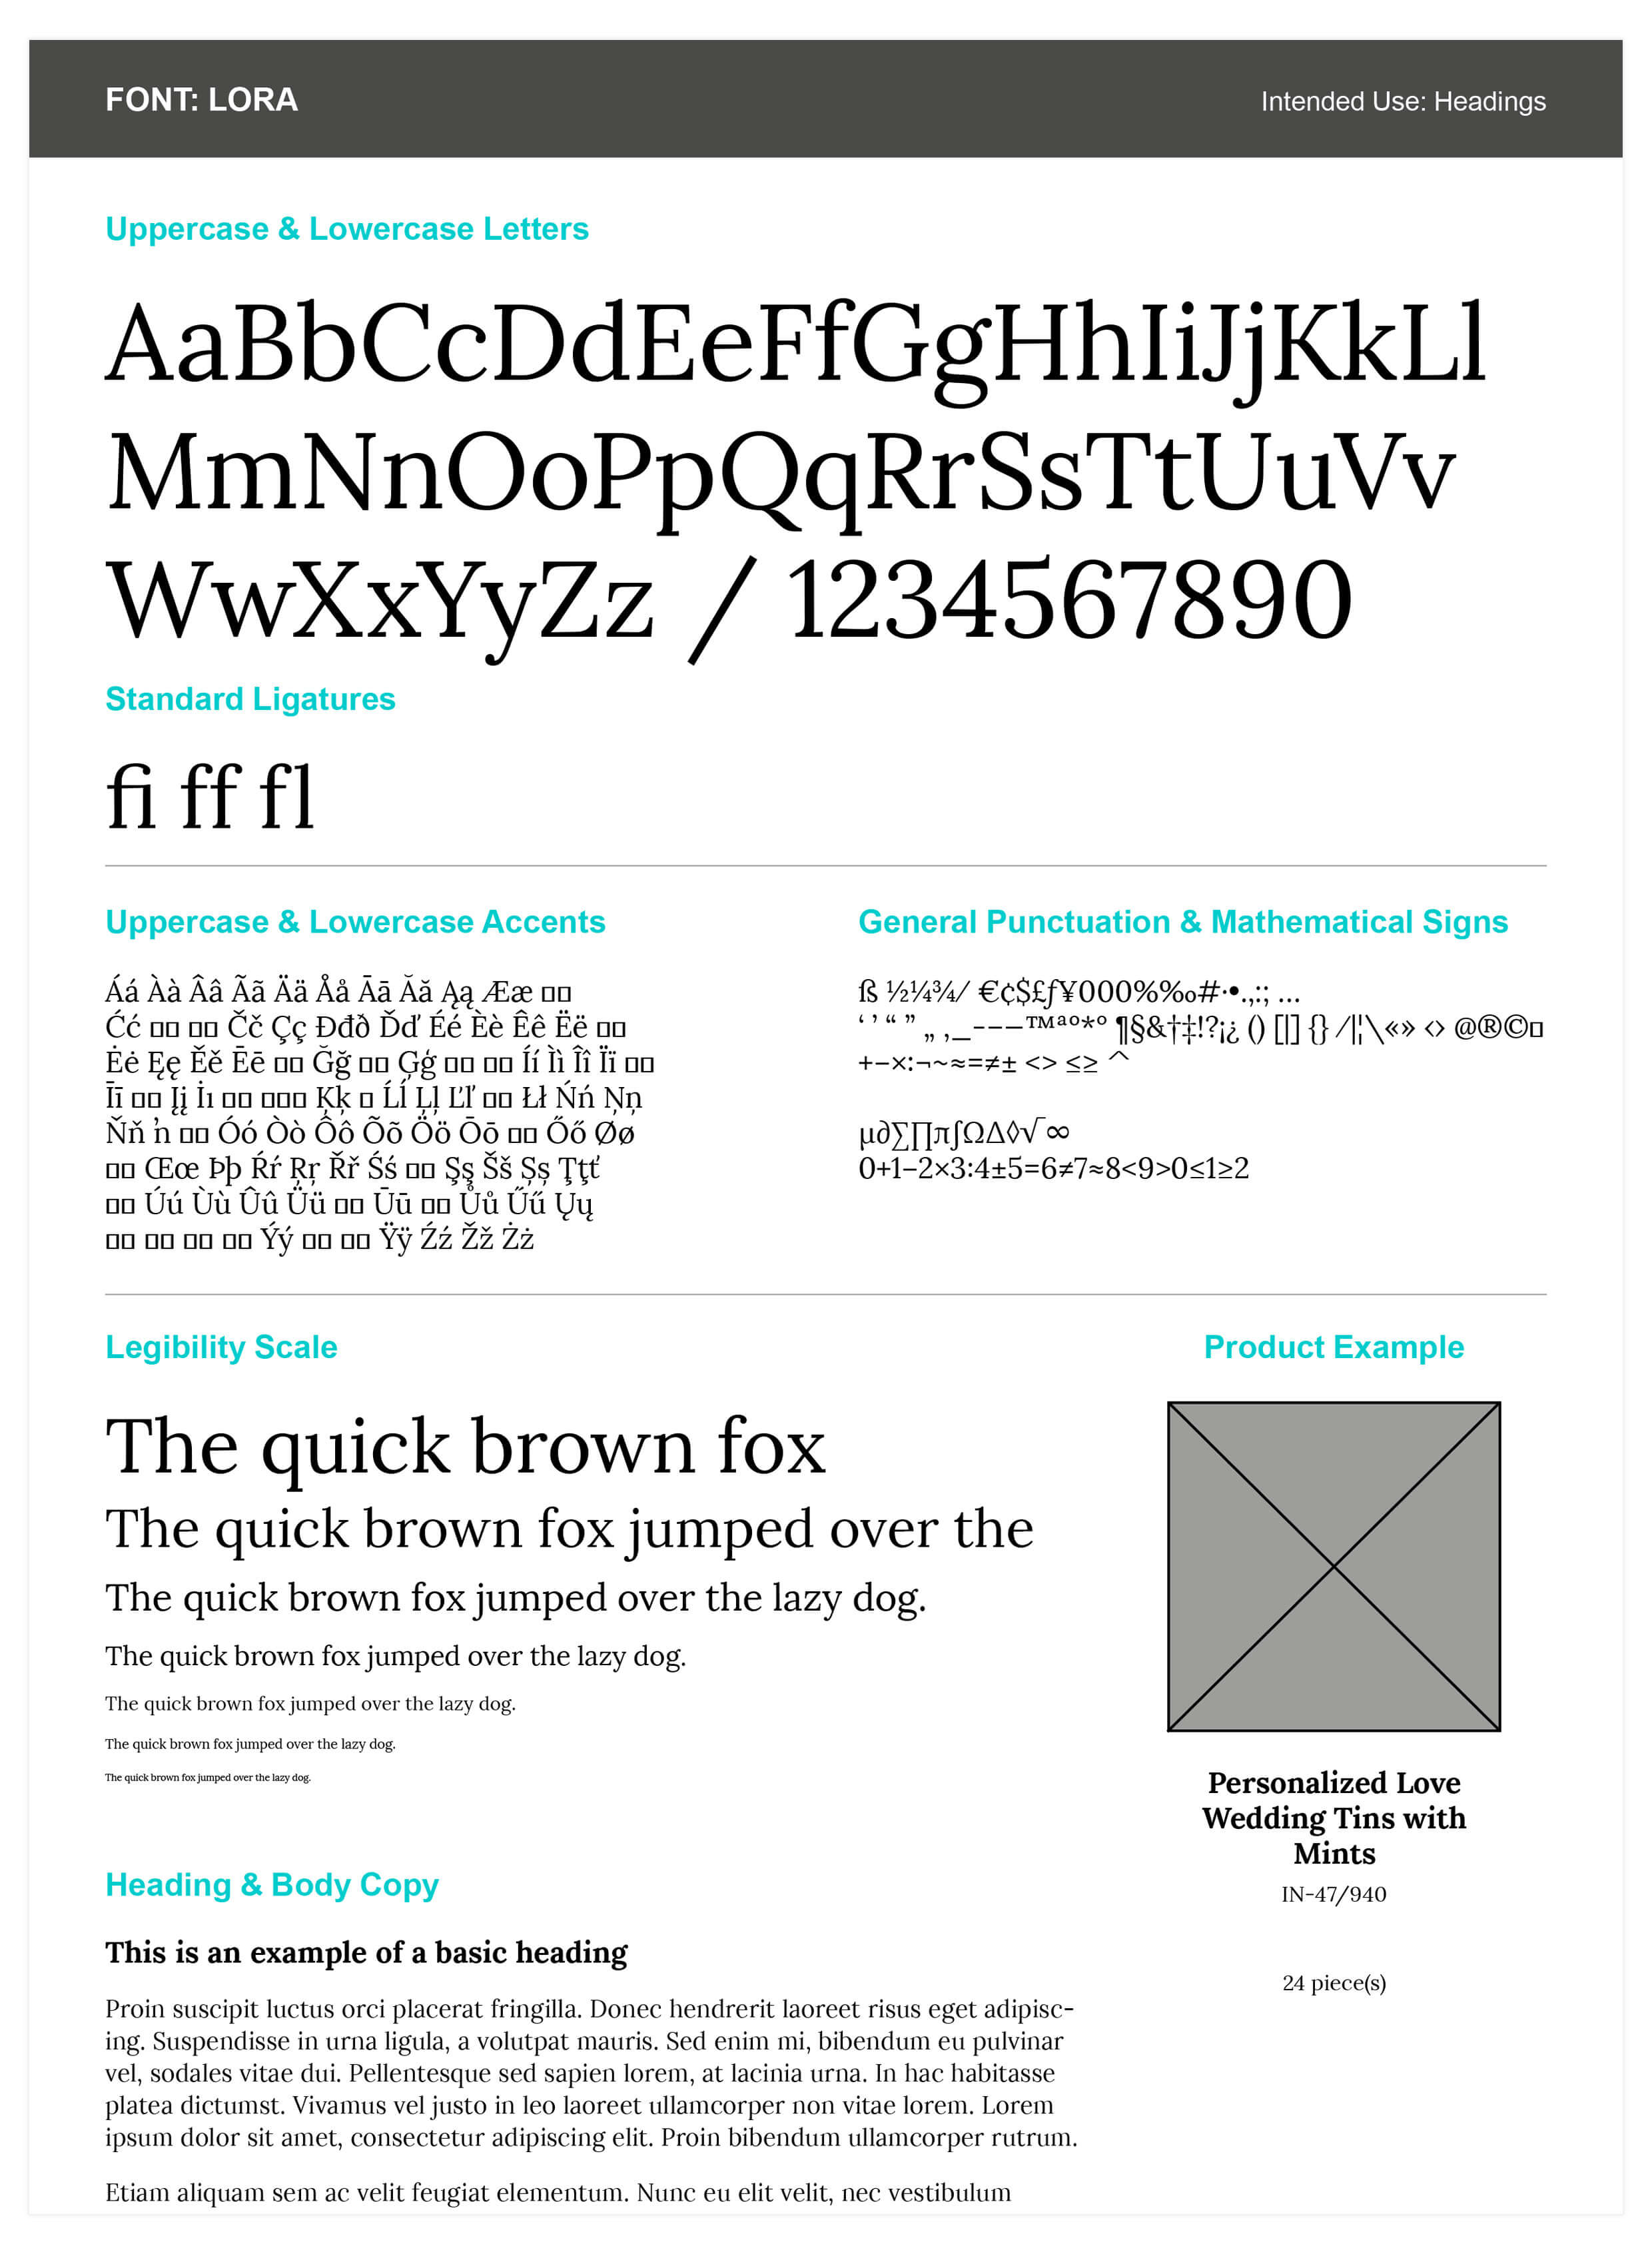 Marketing font research template